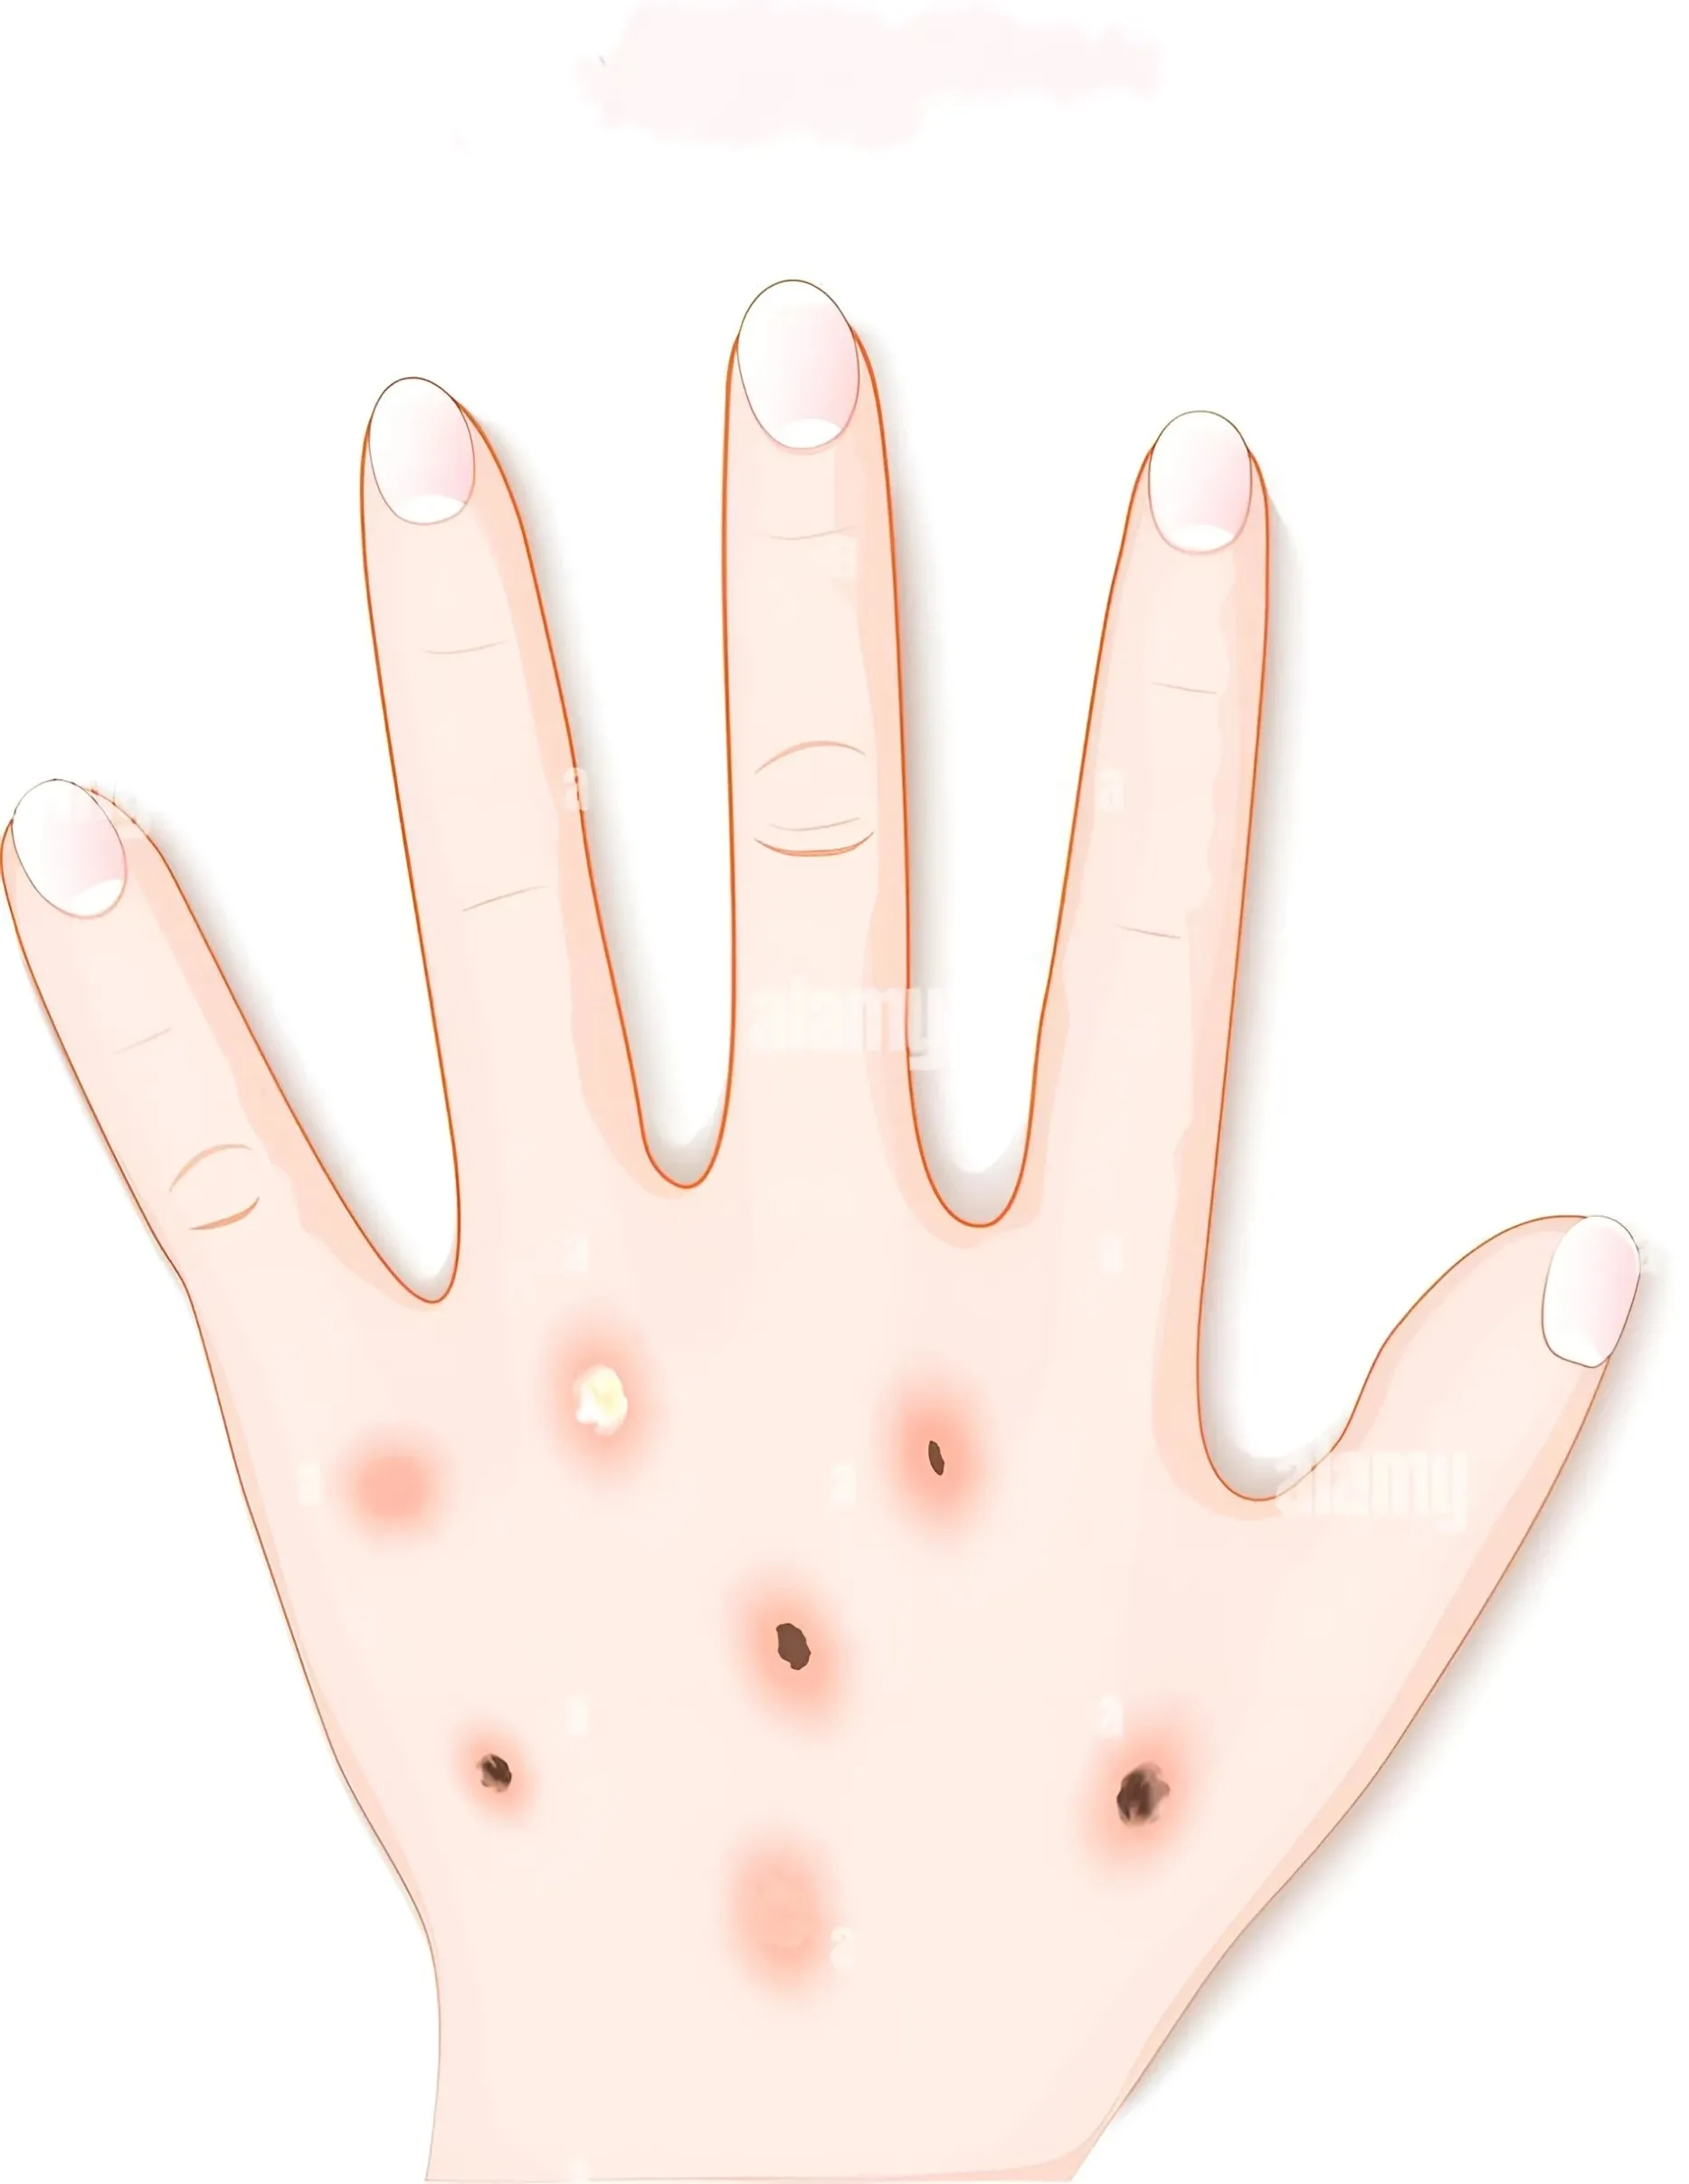 What is Actinic Keratosis (AK)?